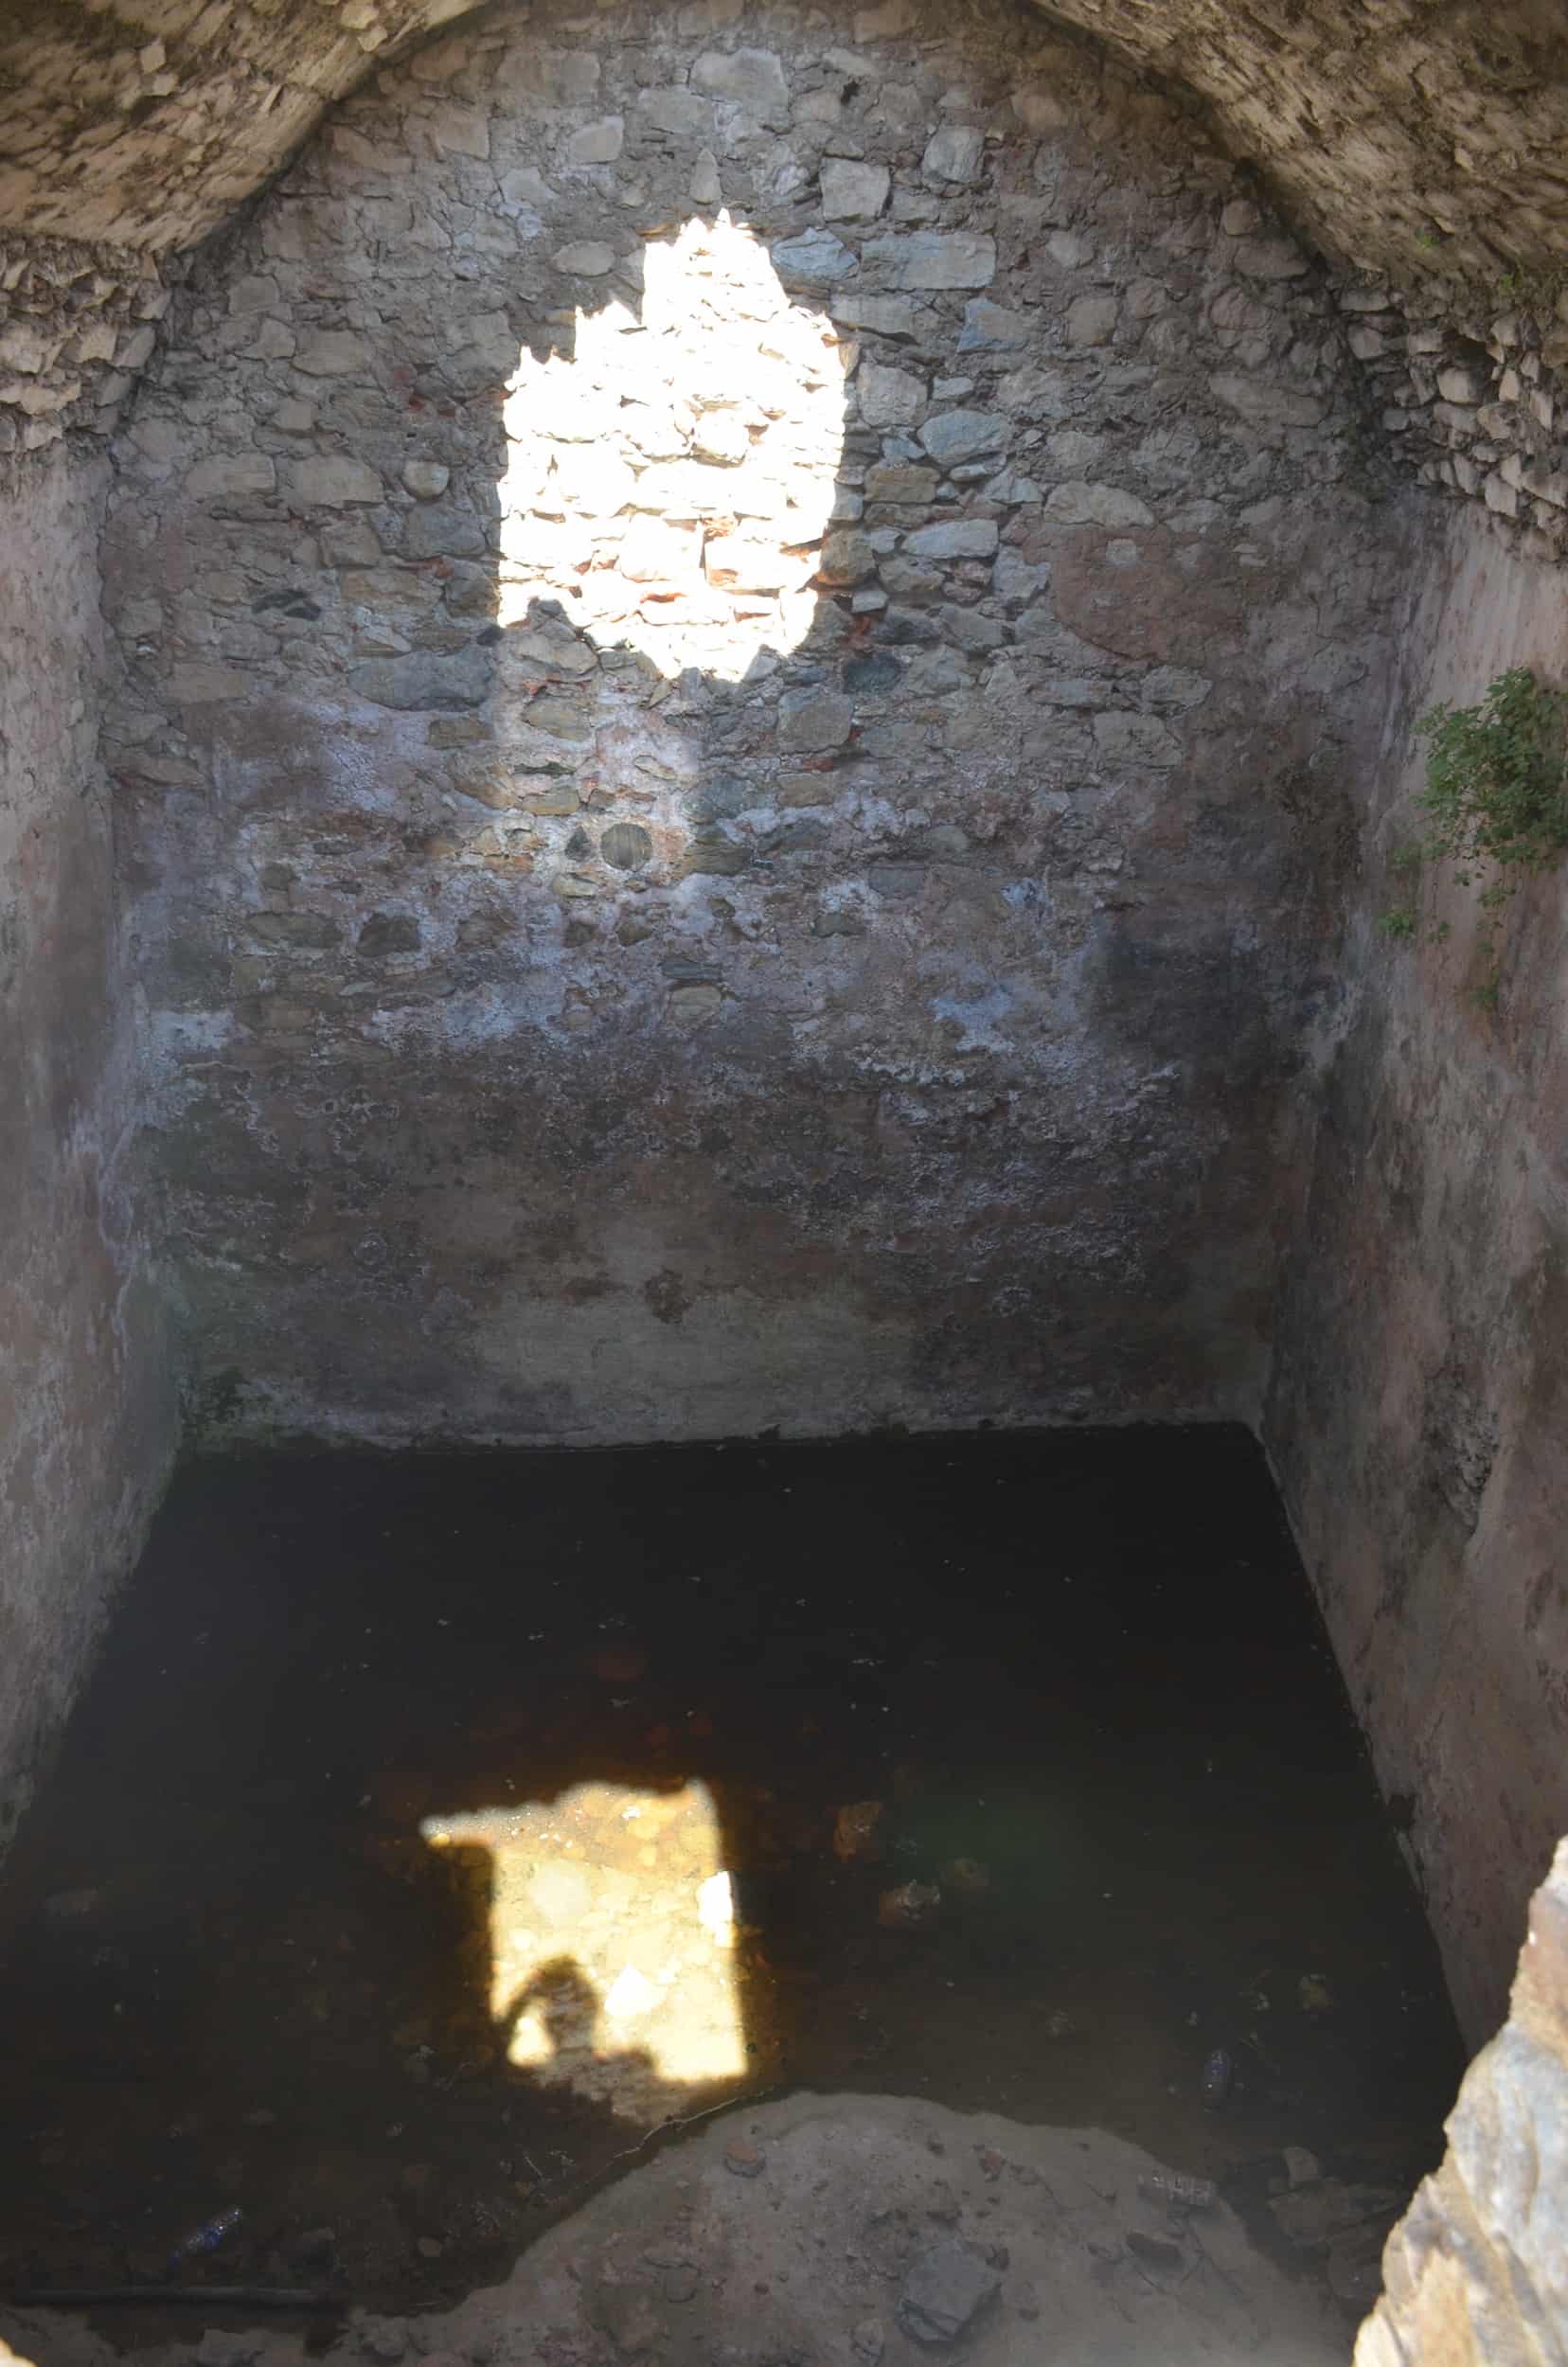 Looking into a Turkish period cistern at Ayasuluk Castle in Selçuk, Turkey